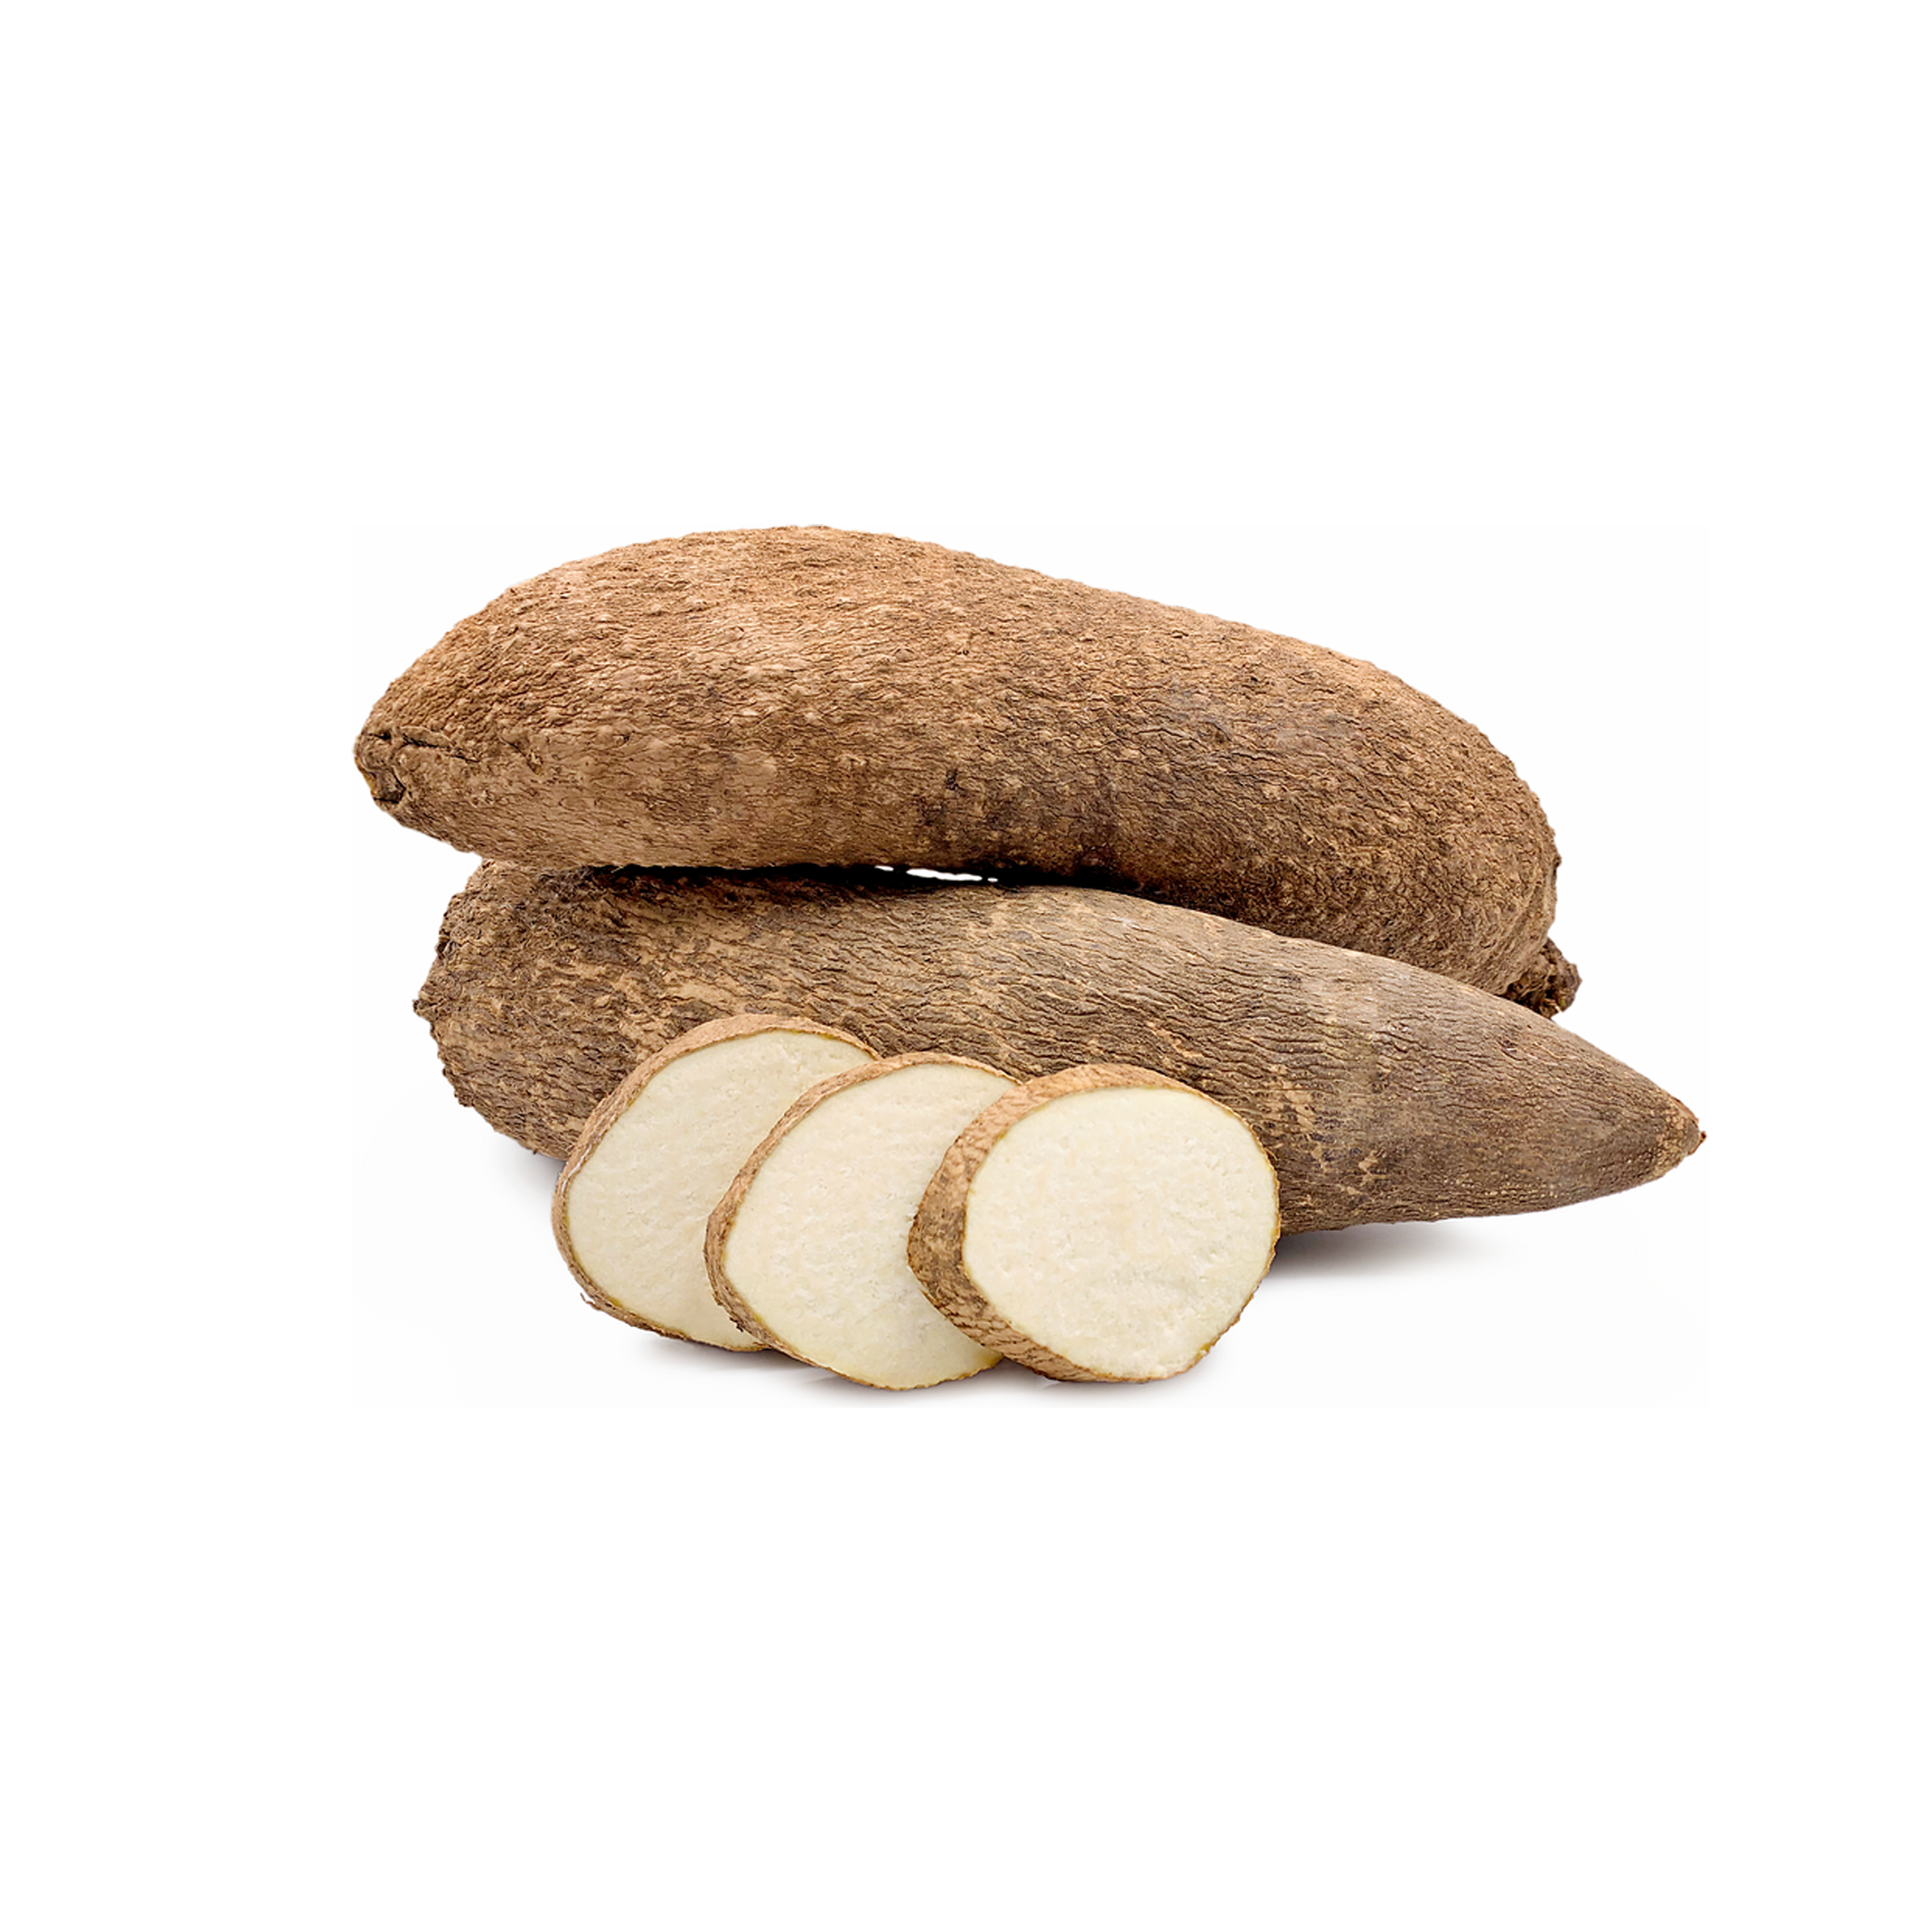 African Yam (Approx 3LB)